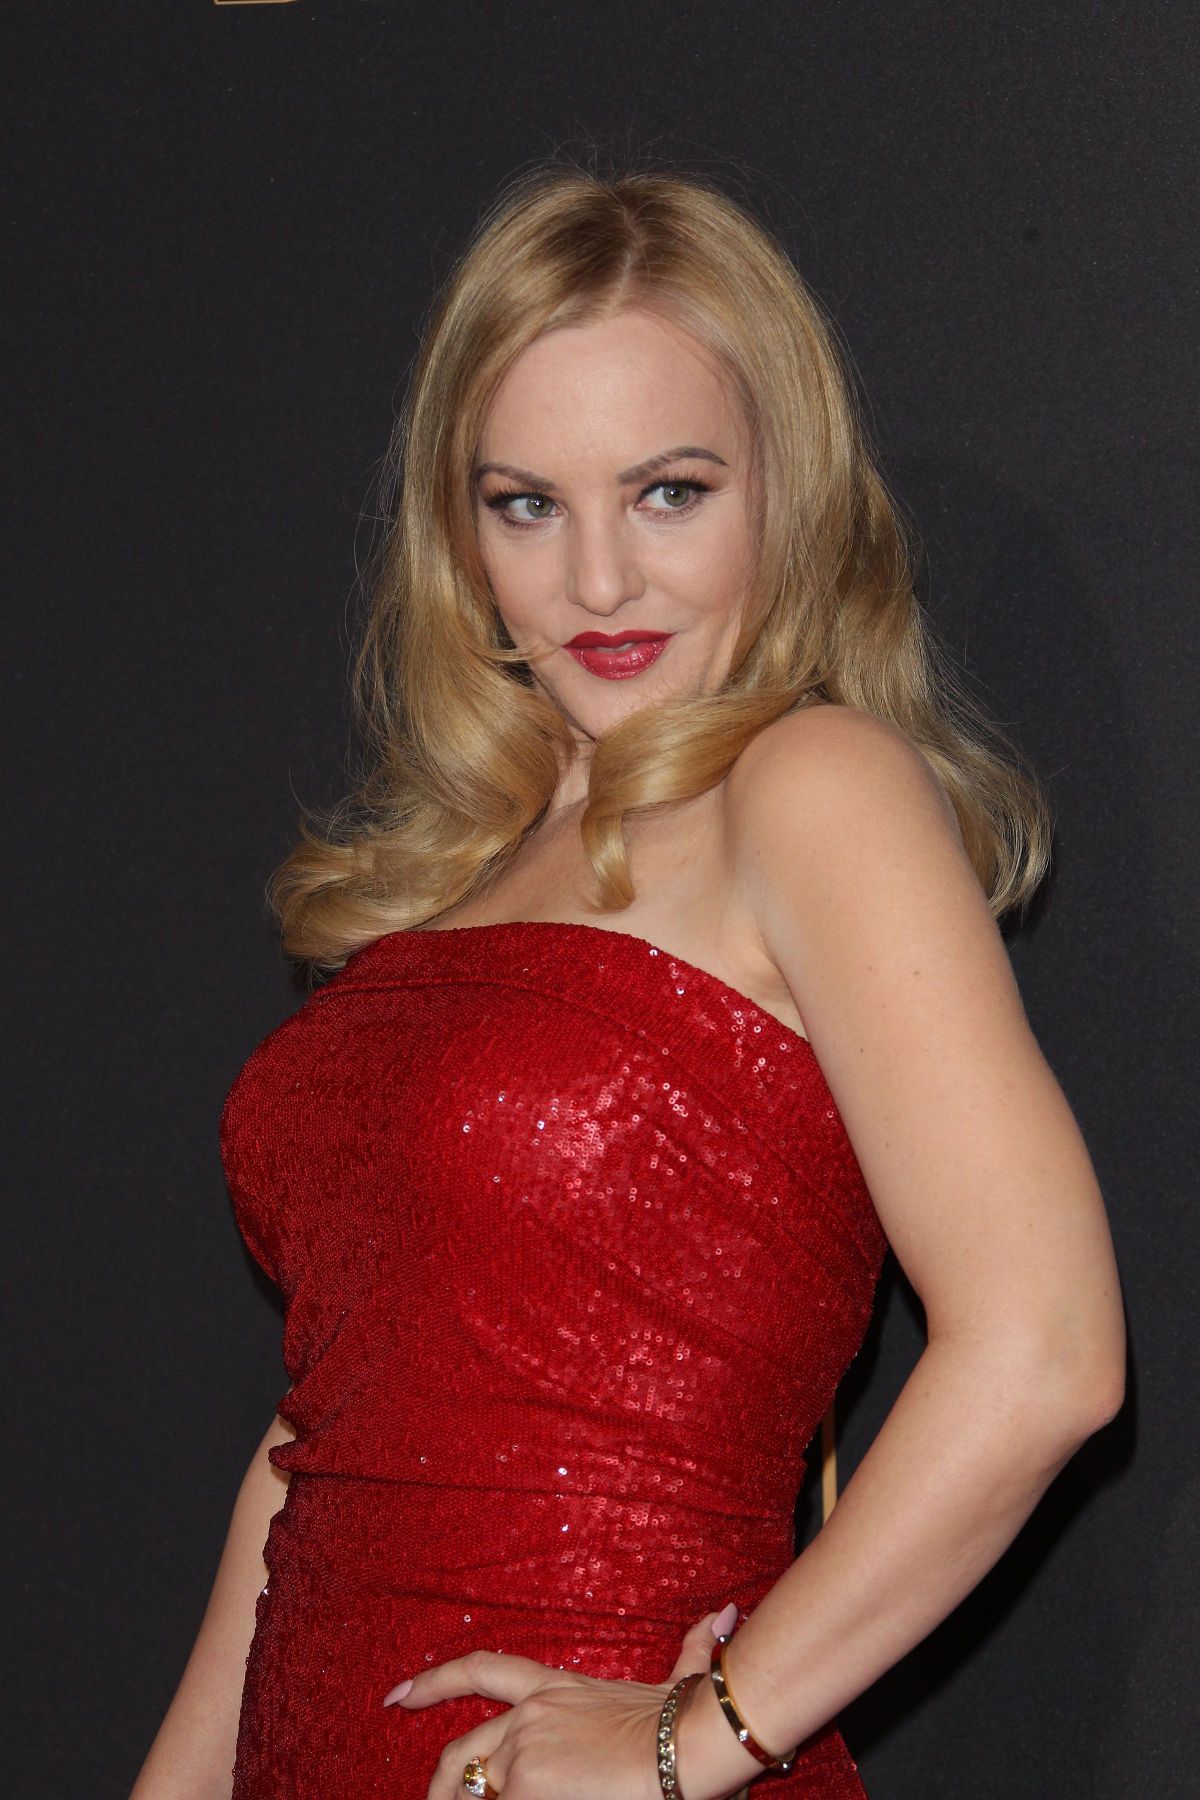 55 Hot And Sexy Pictures Of Wendi McLendon-Covey Is Going To Make Your Day ...